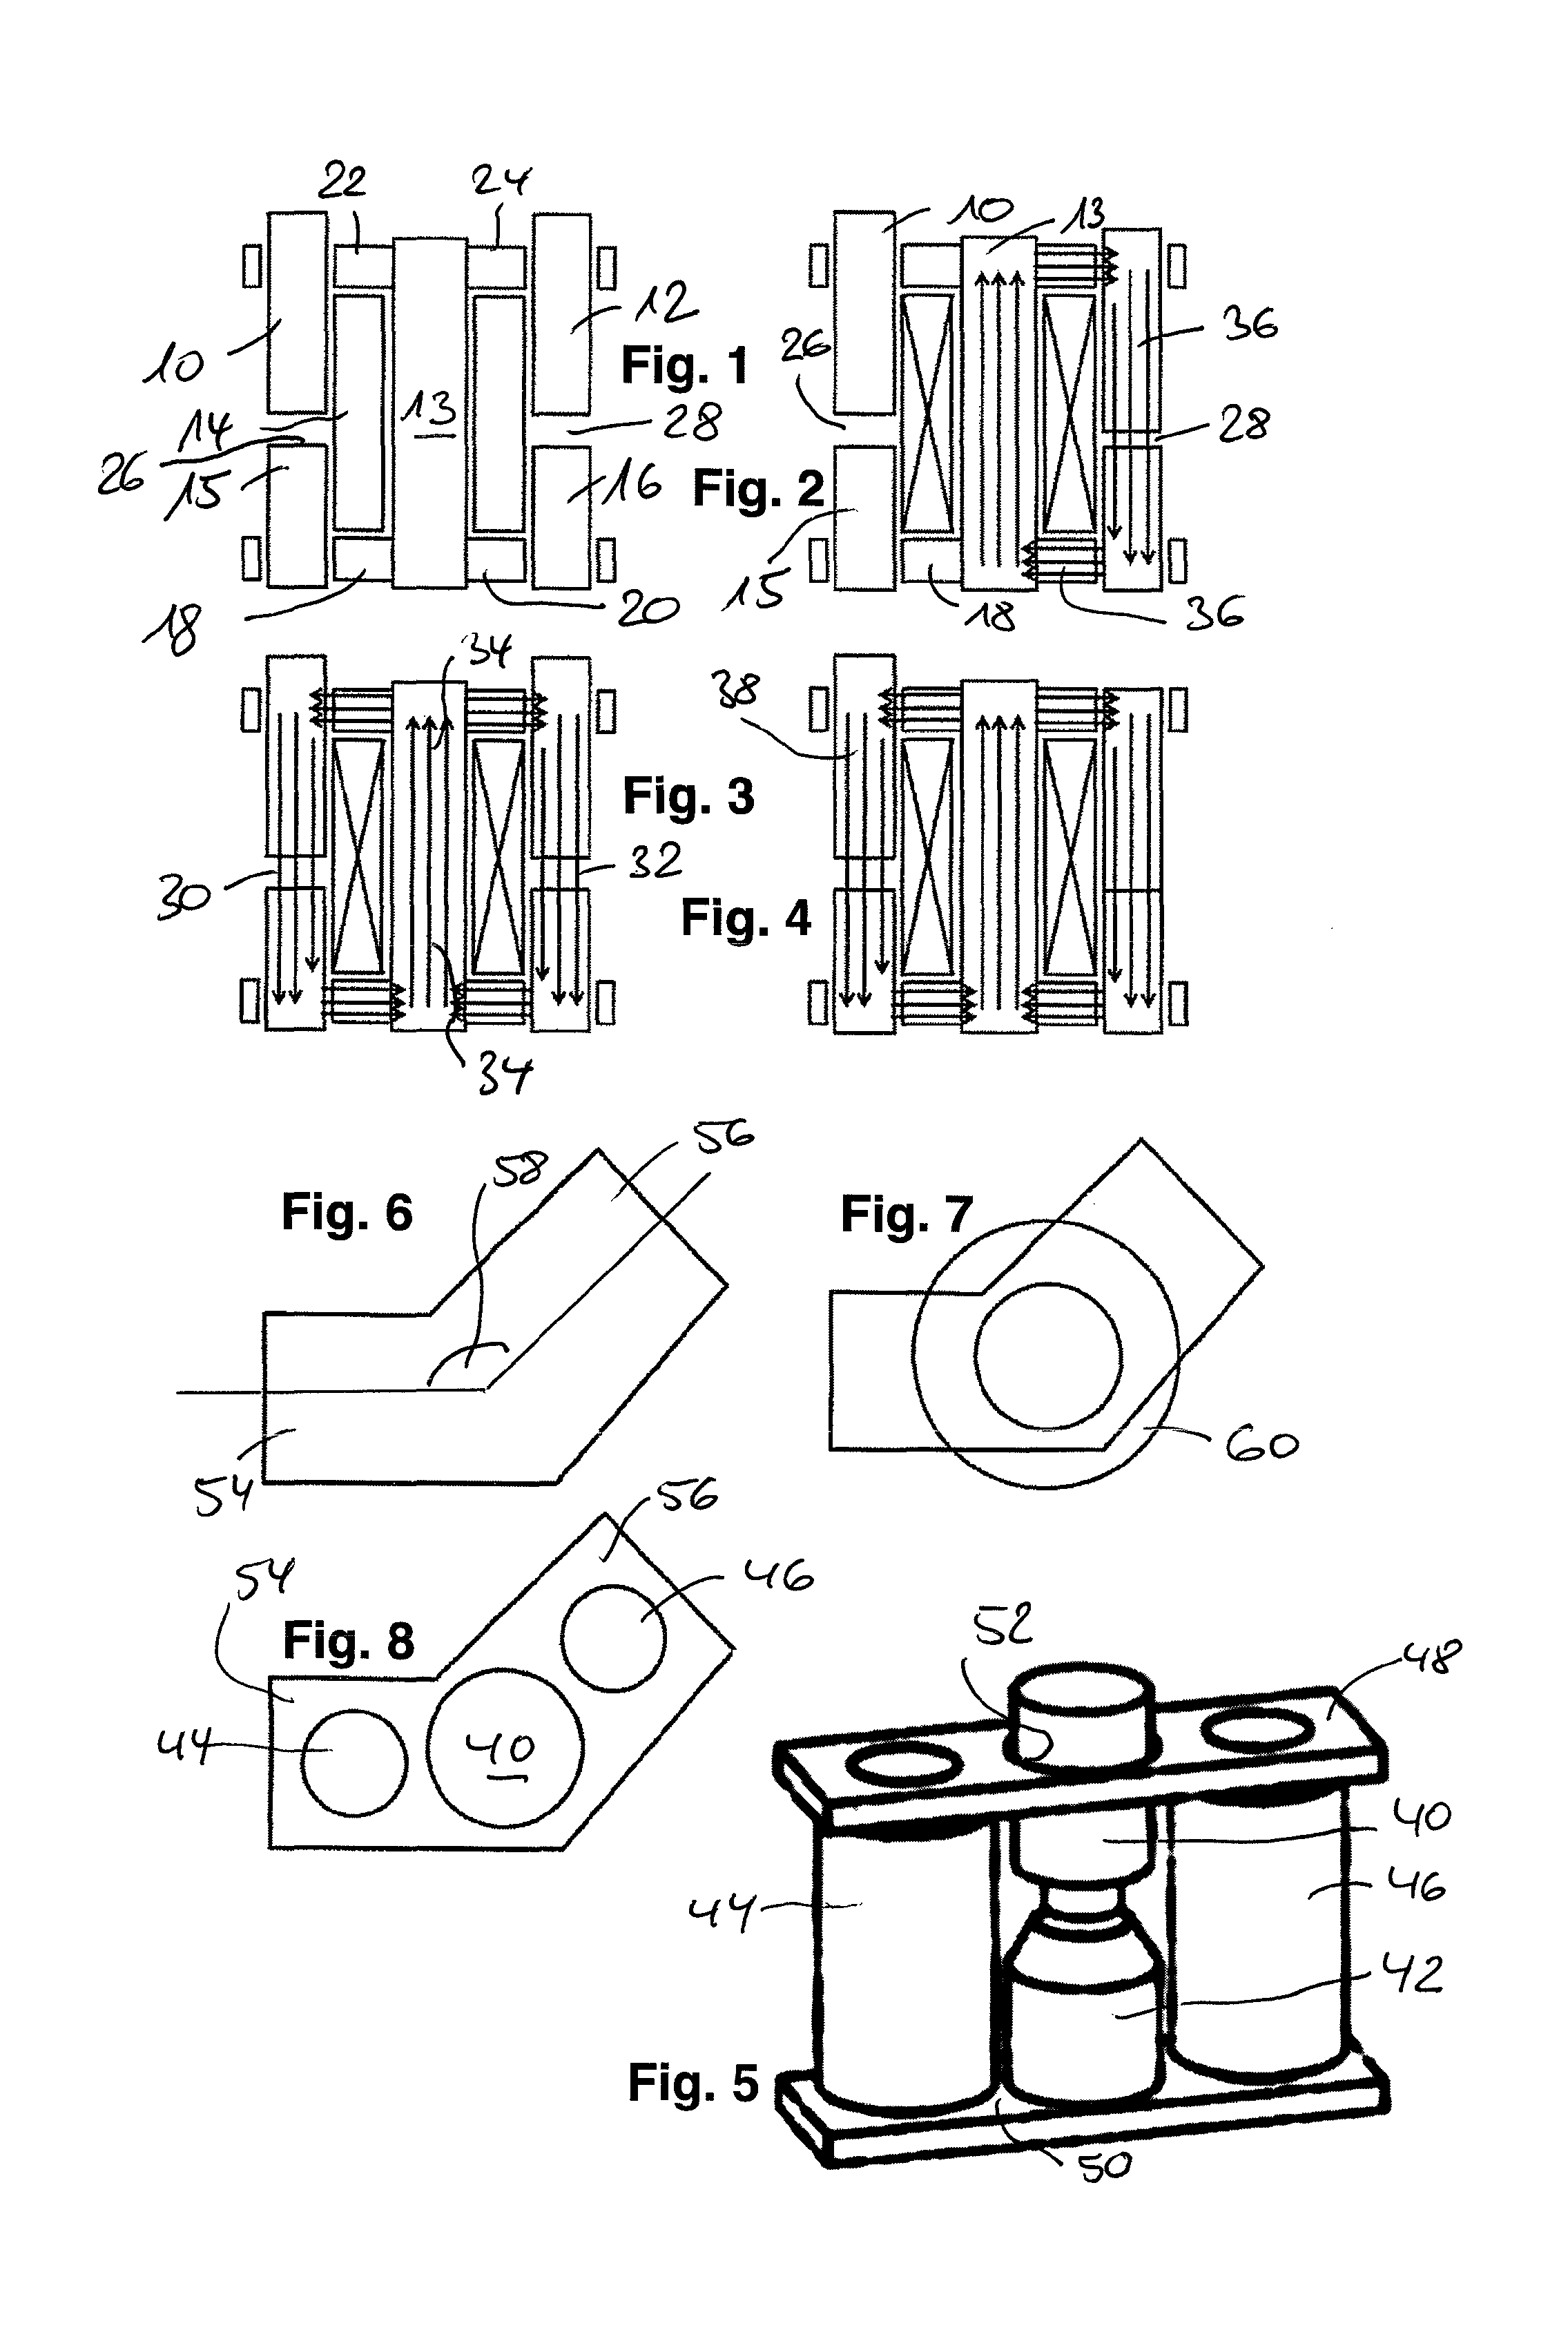 Electromagnetic actuator device